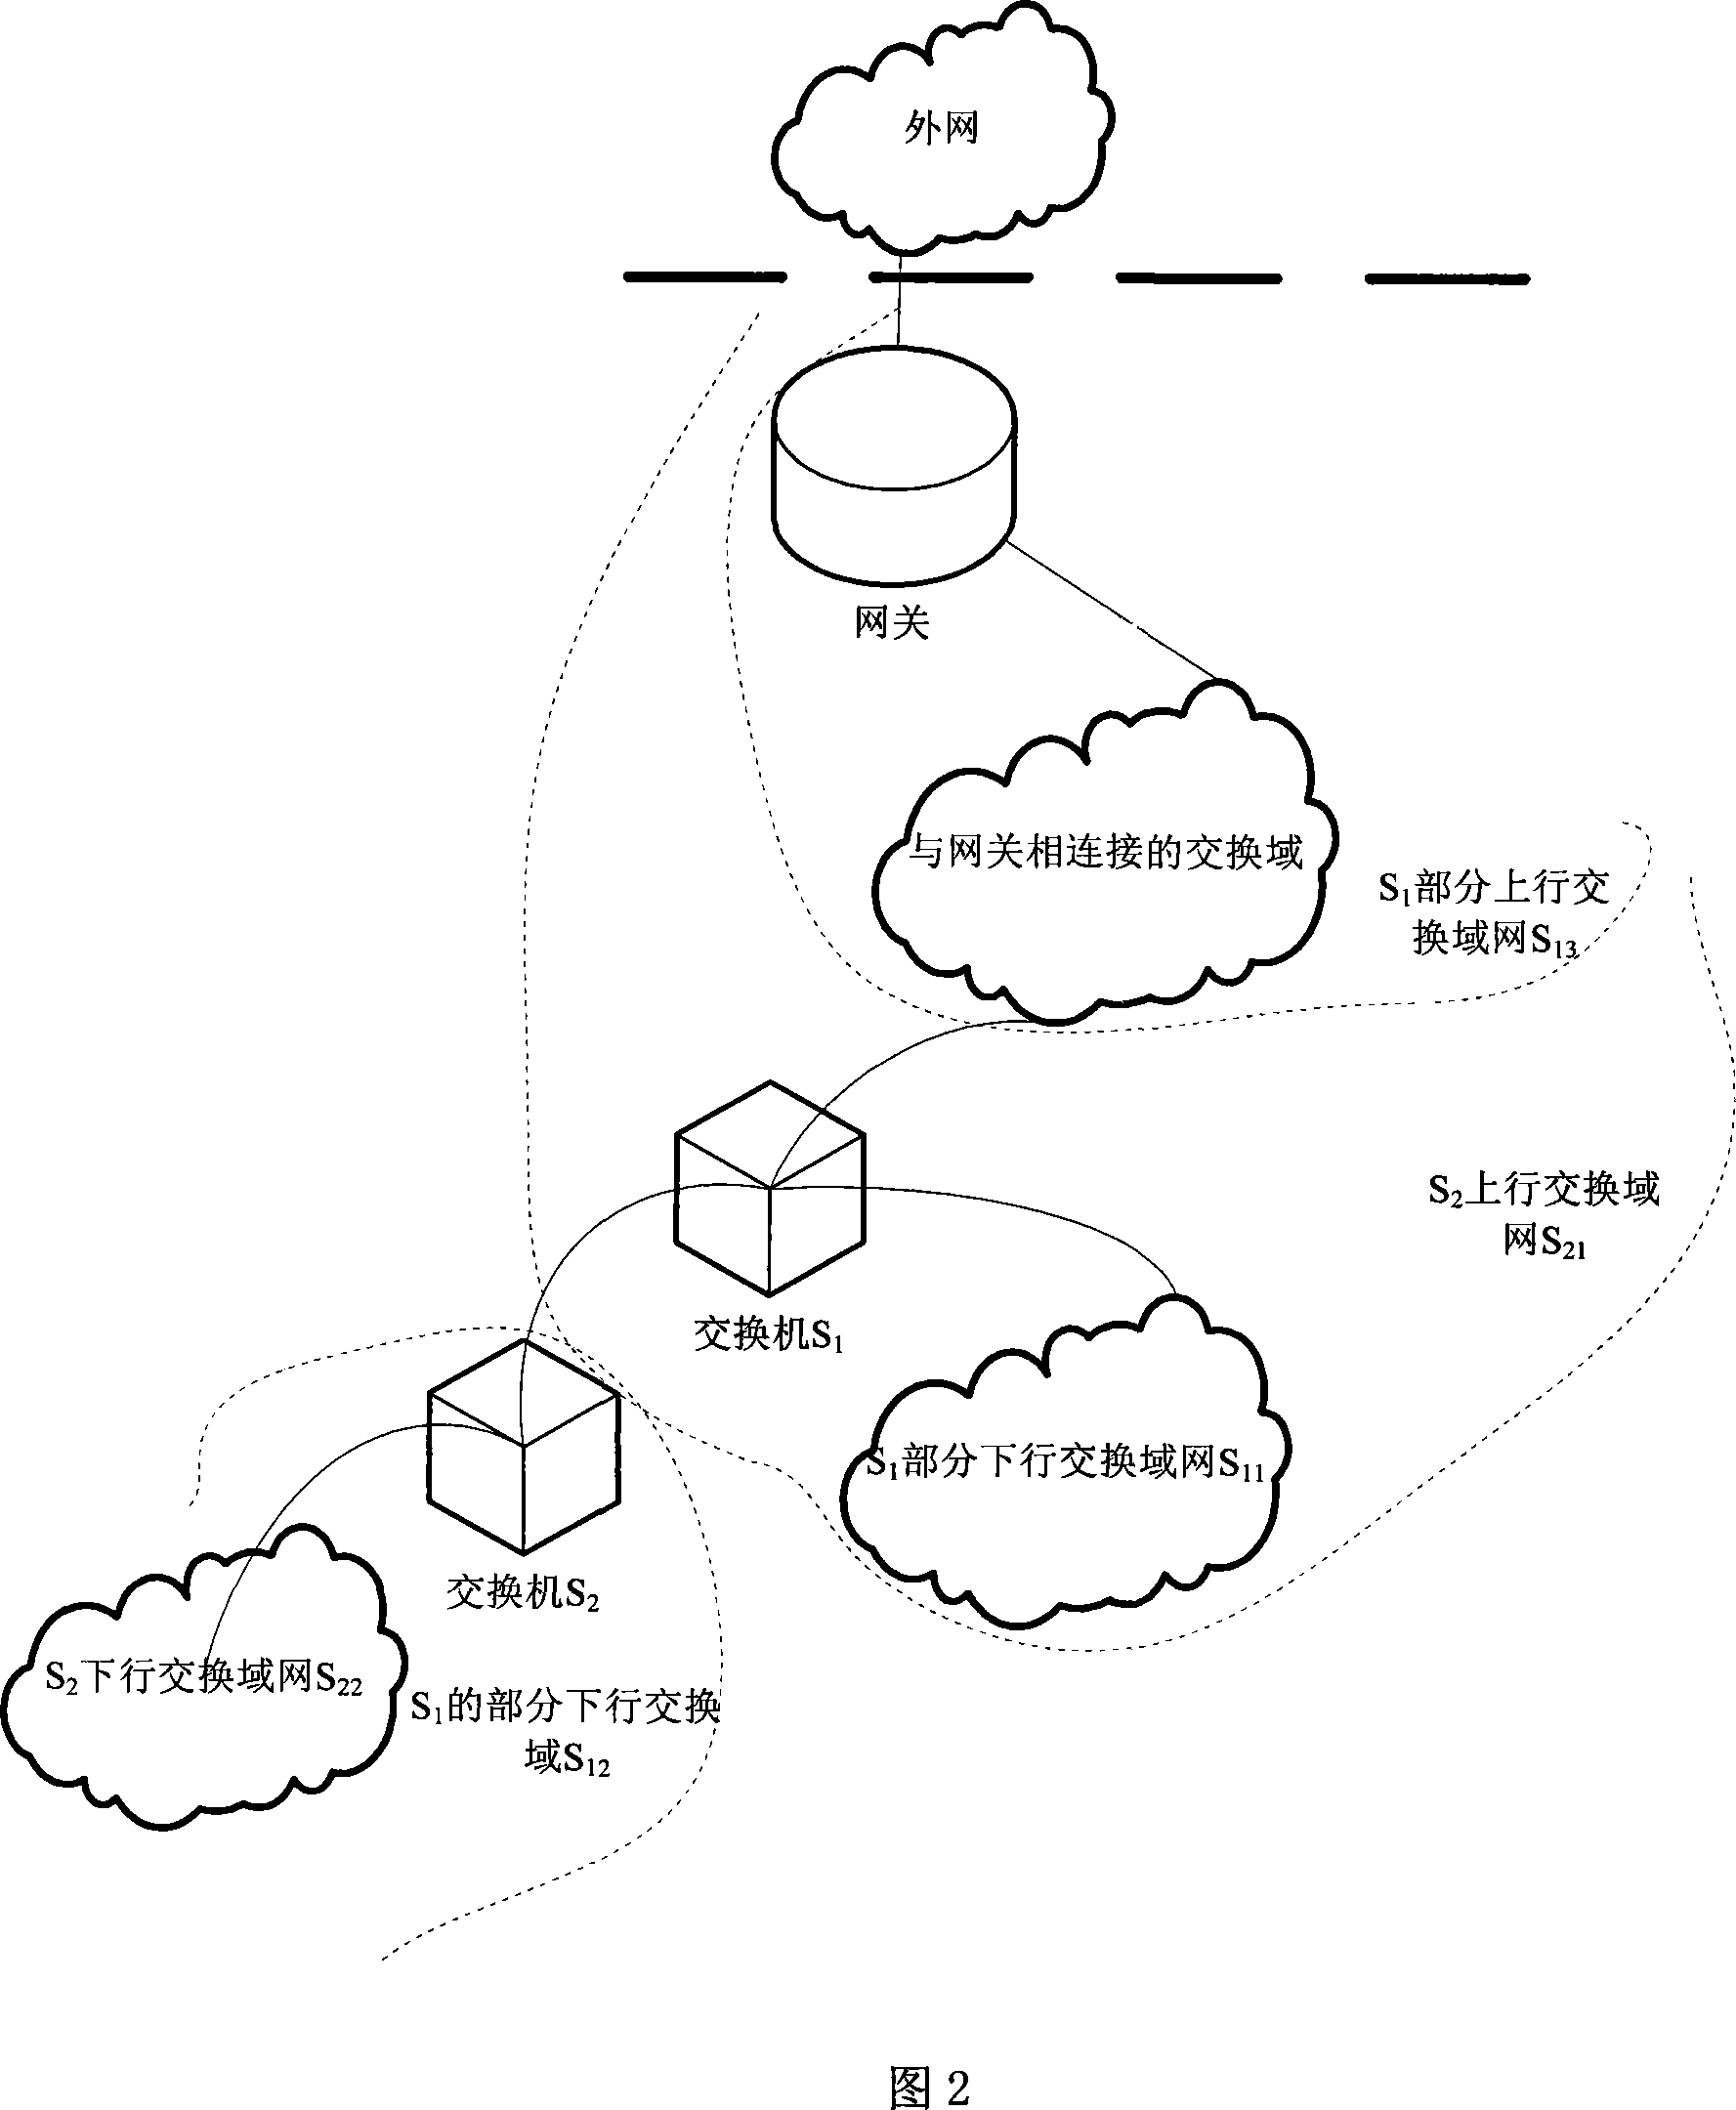 Network topology discovering method facing to data link layer